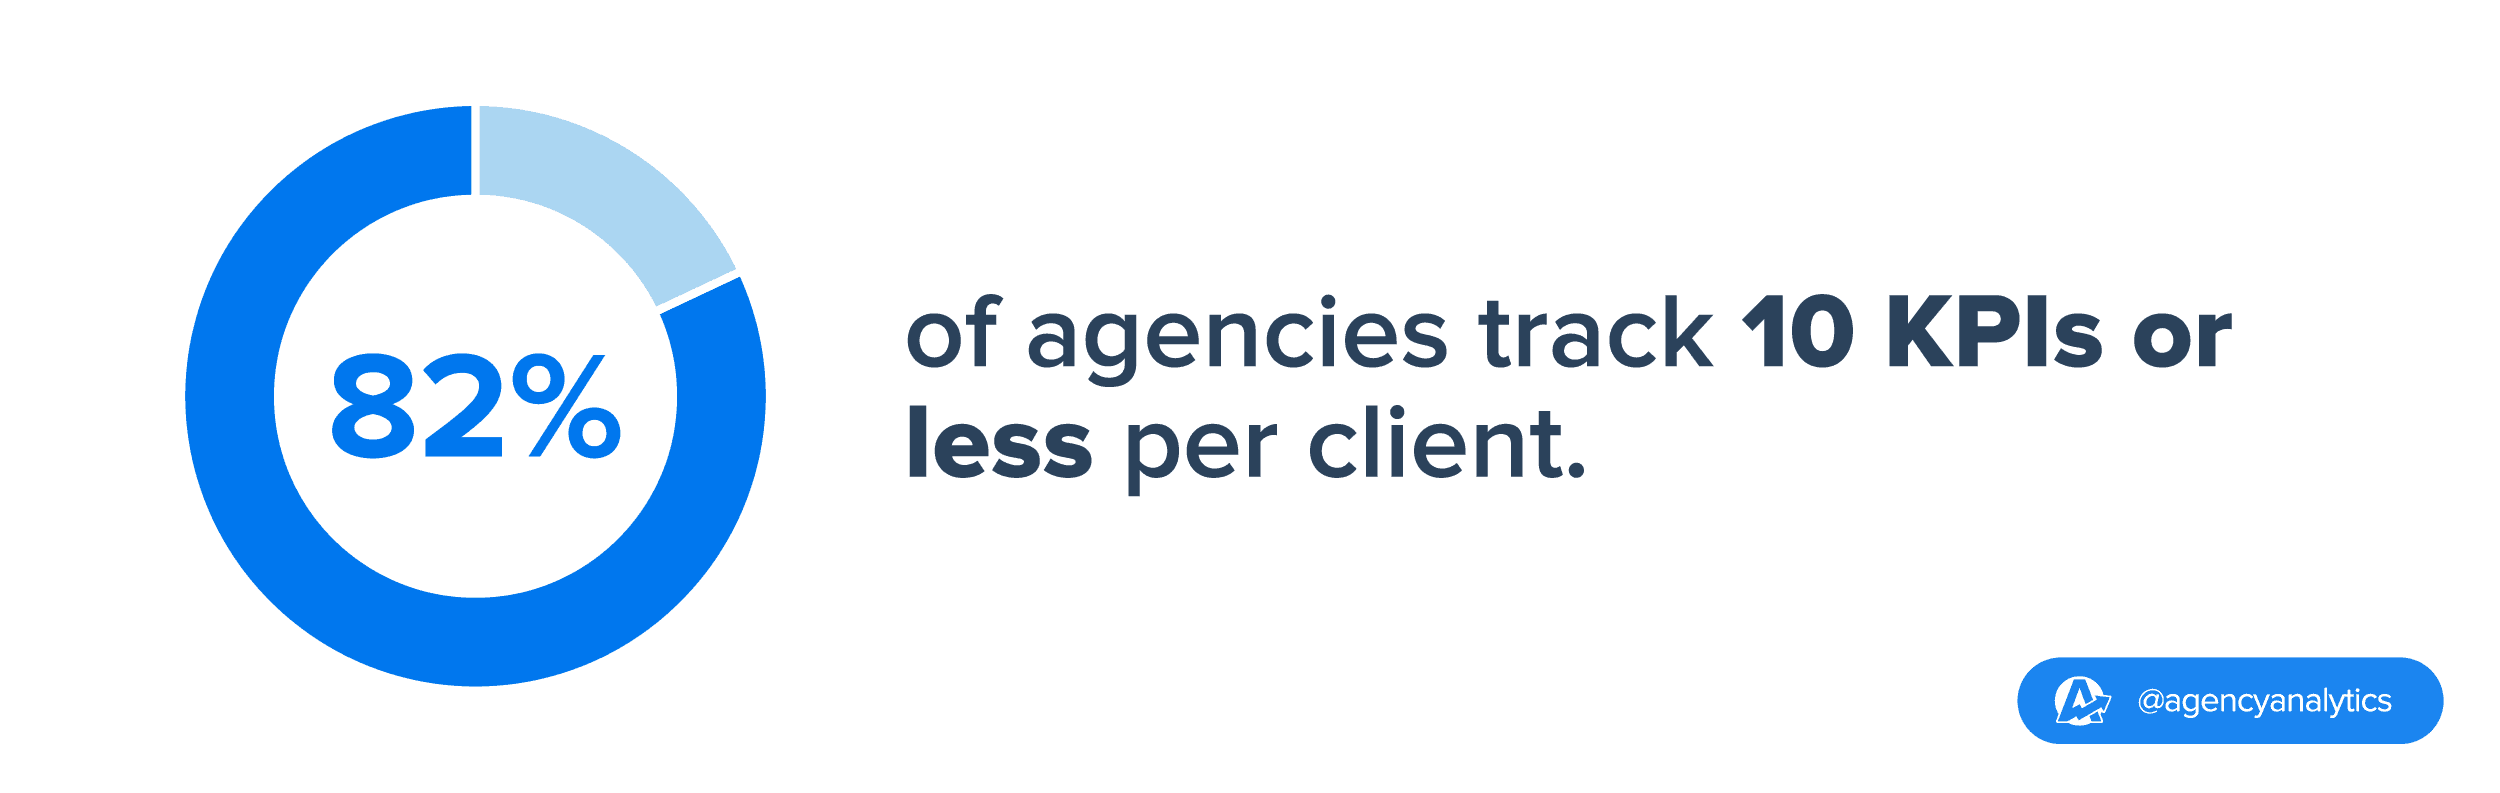 stat on percentage of agencies that track 10 KPIs or more 